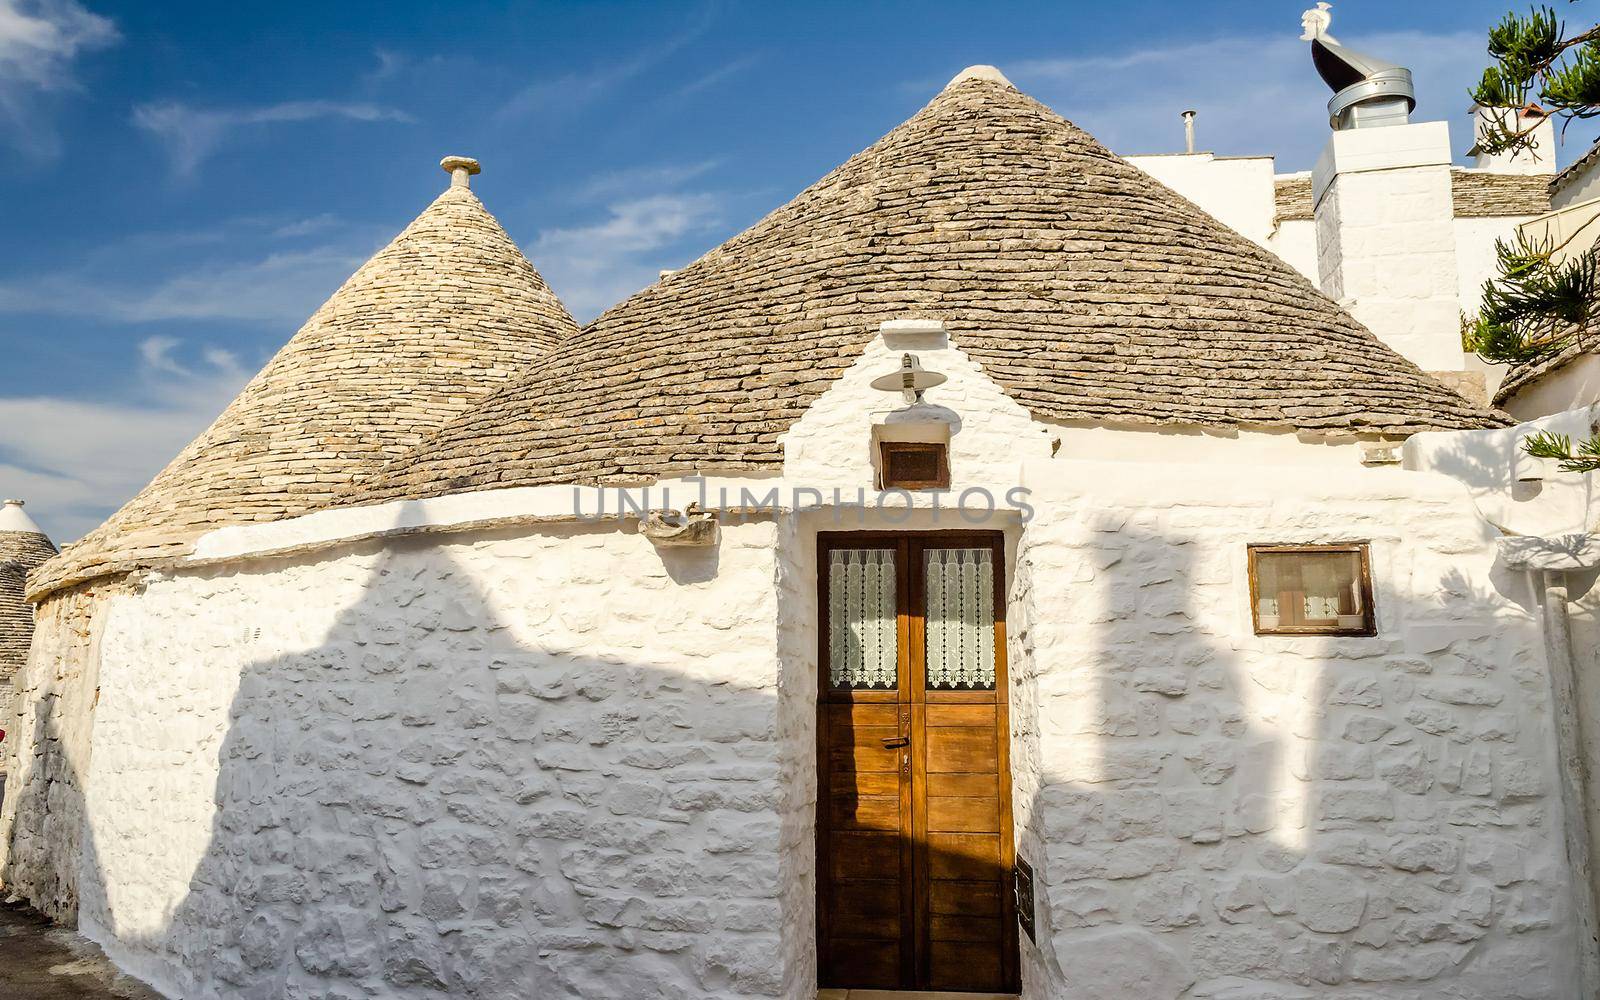 Typical trulli buildings with conical roofs in Alberobello, Apulia, Italy